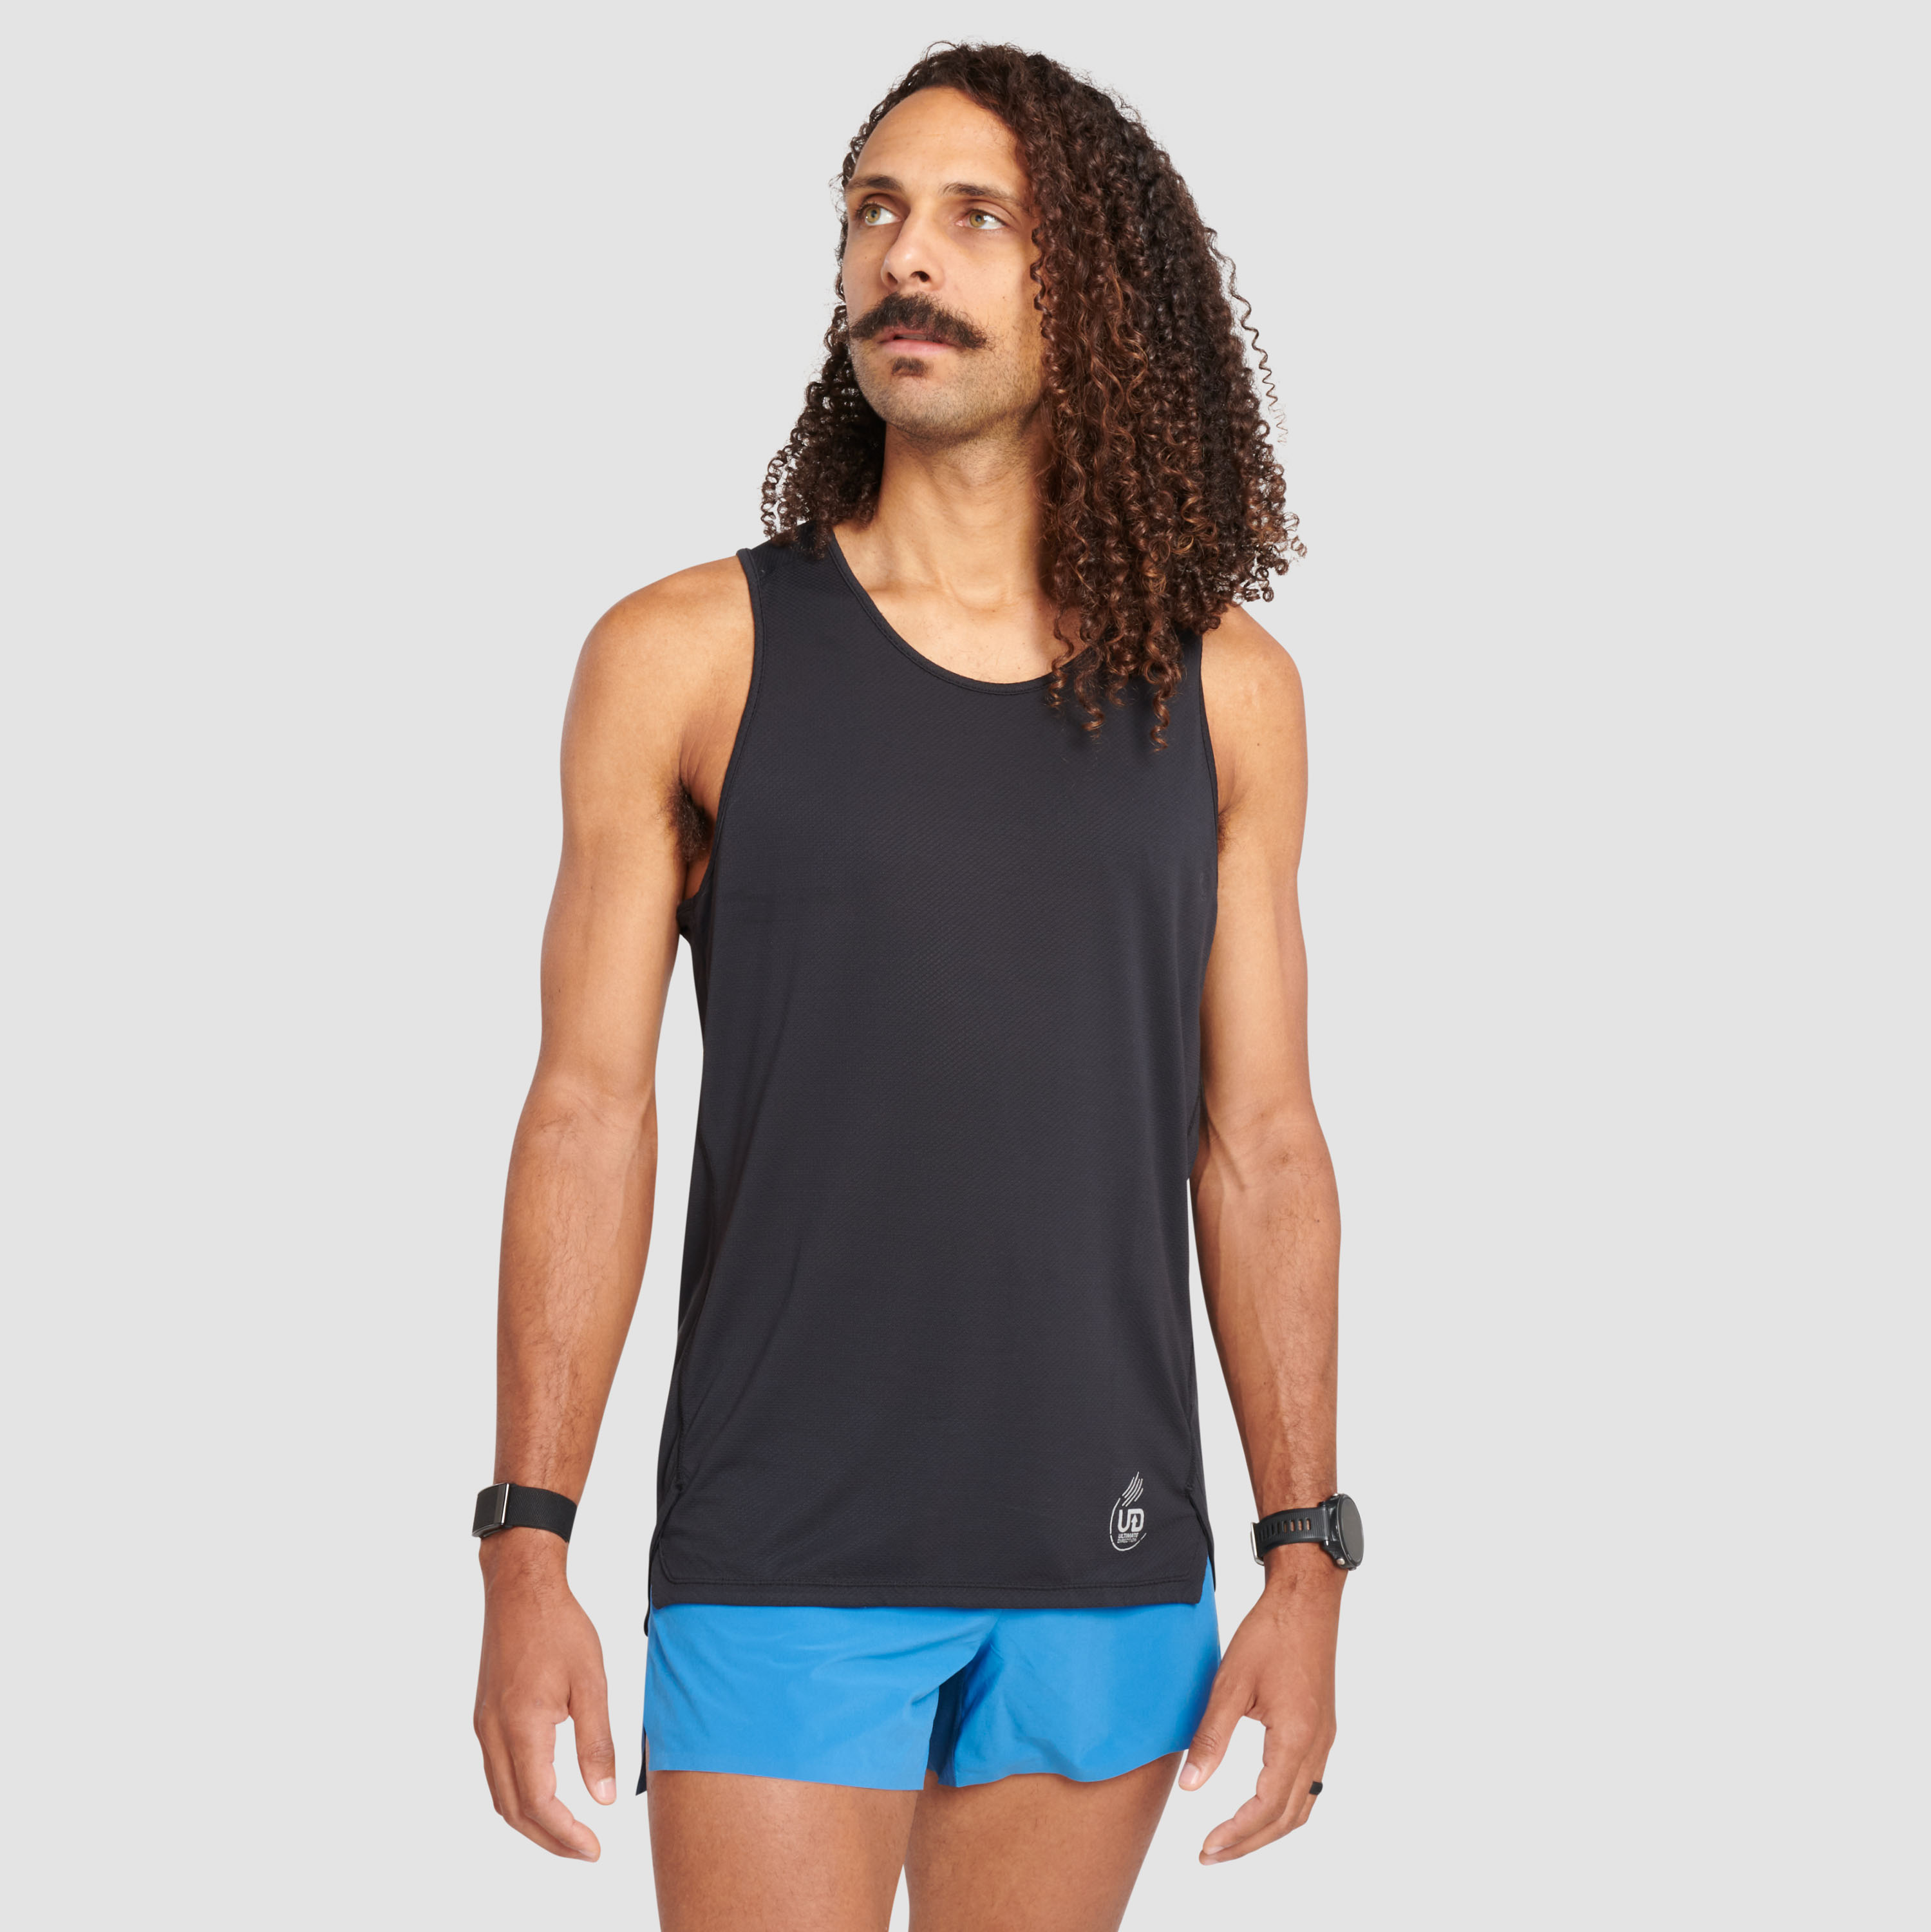 Ultimate Direction Men's Cumulus Tank Top in Onyx Size XL